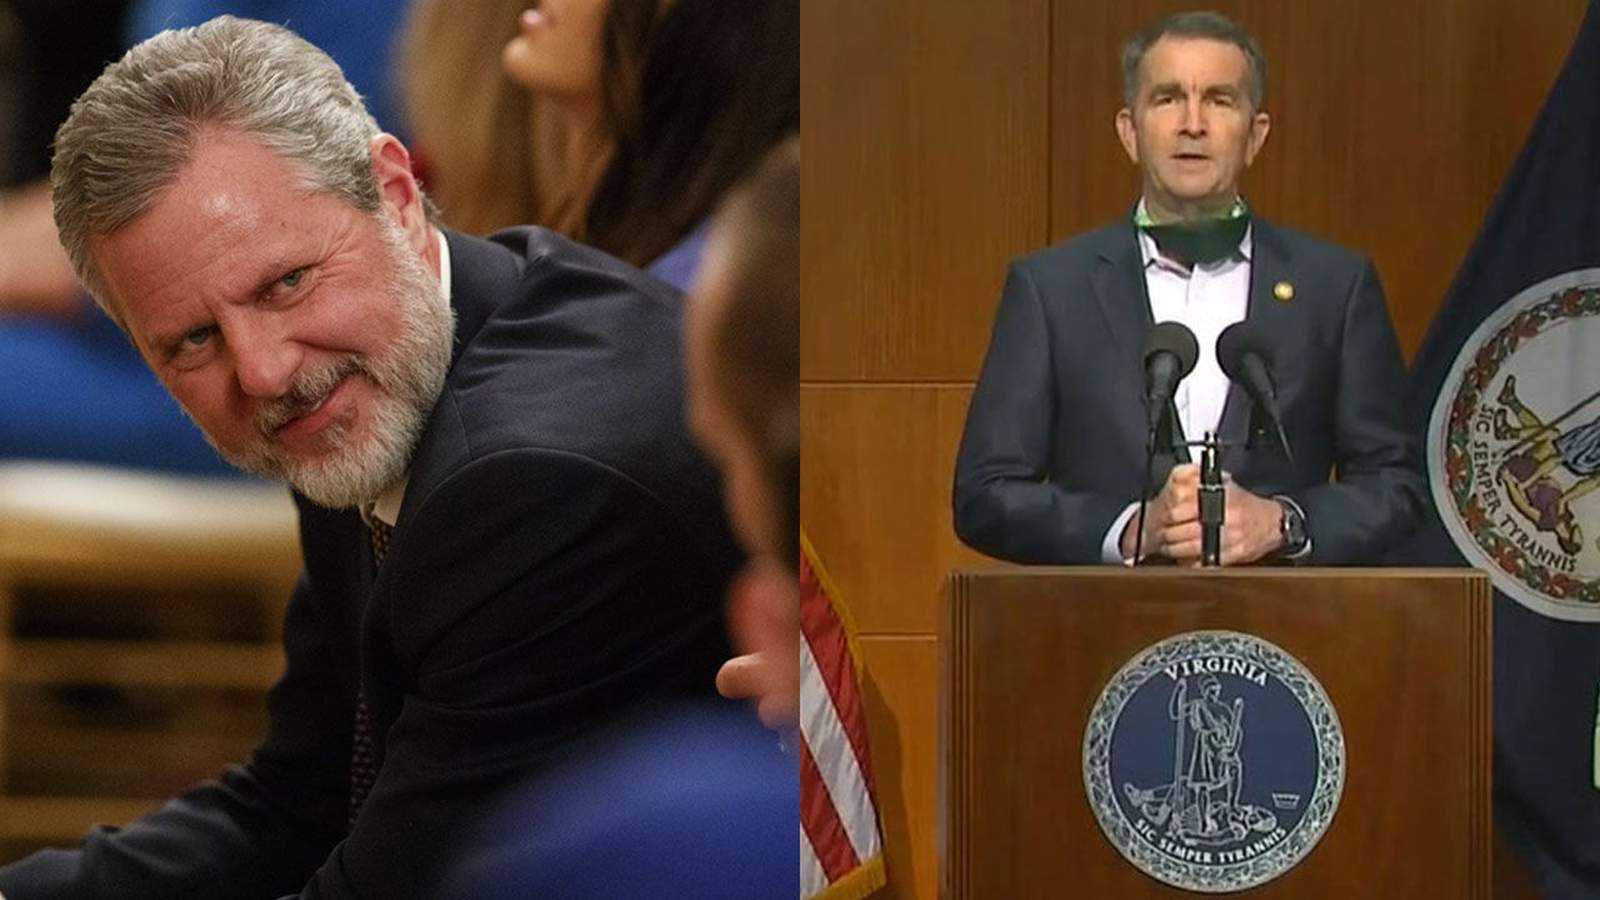 'Do not water the weeds’: Gov. Ralph Northam responds to Liberty’s Jerry Falwell’s mask tweet